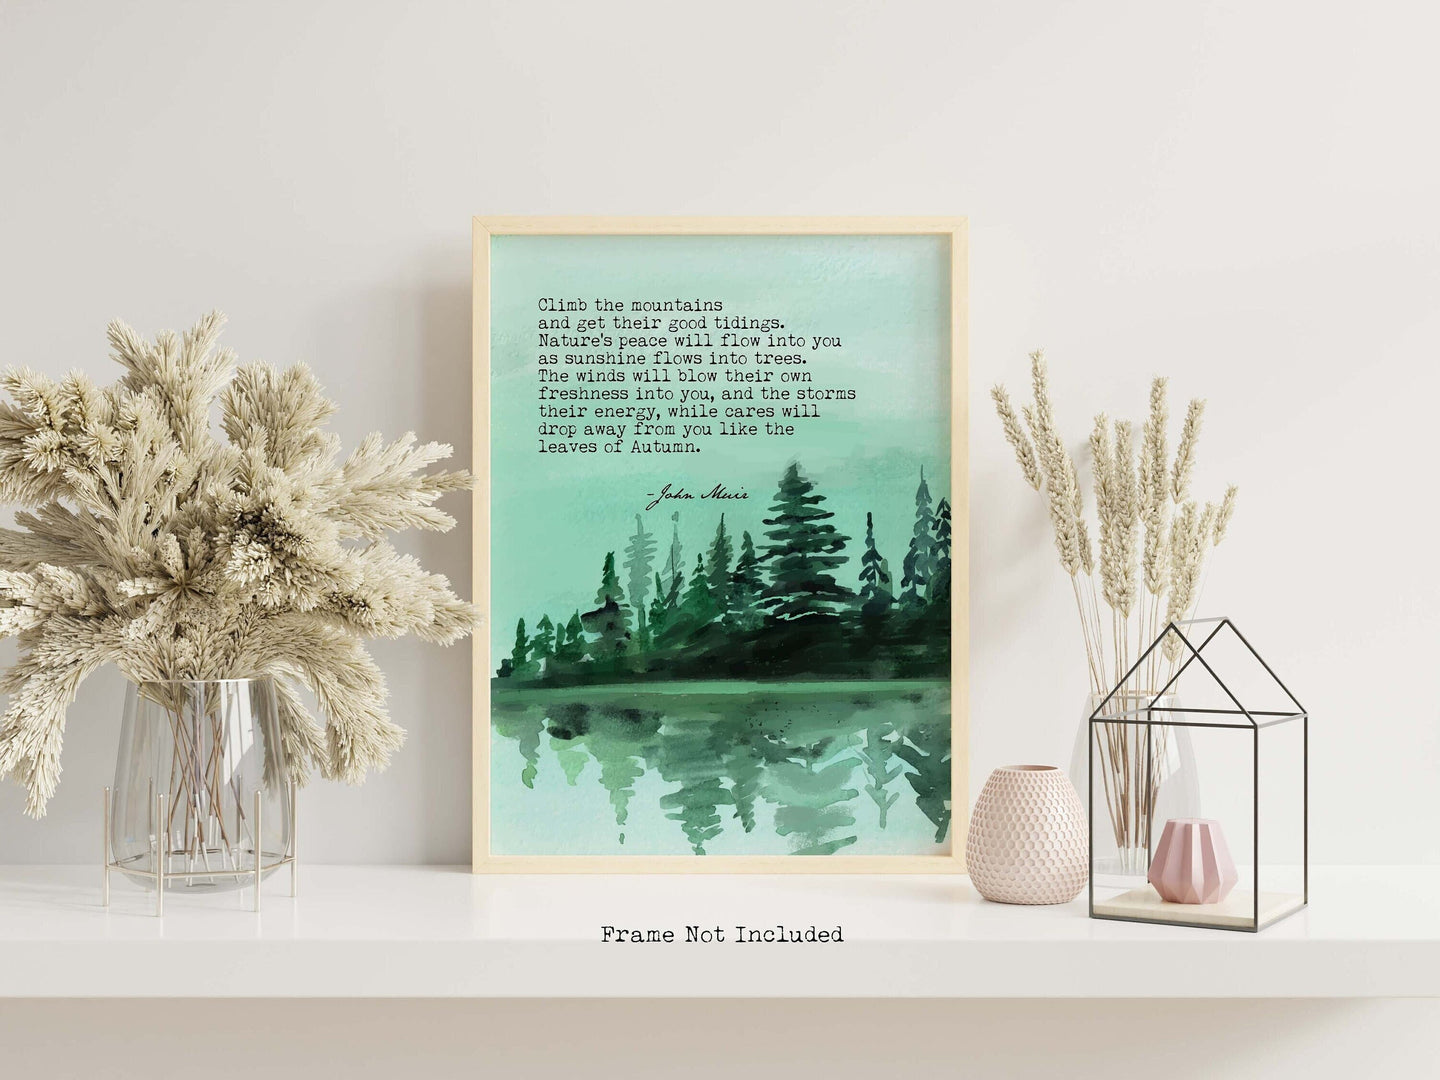 John Muir Quote - Climb the mountains and get their good tidings - Travel wall art